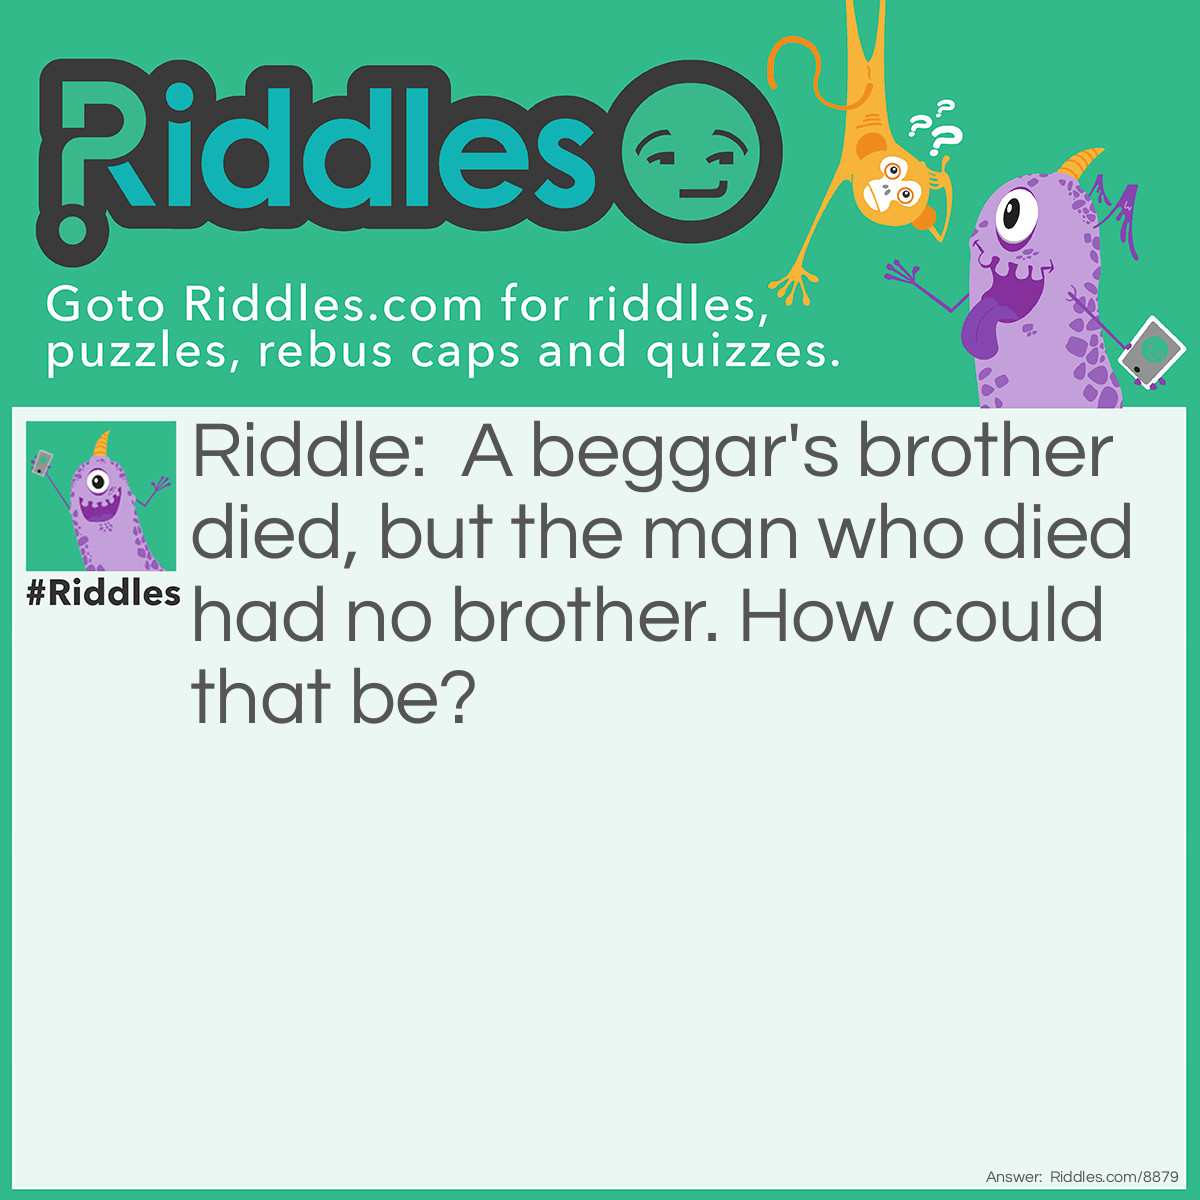 Riddle: A beggar's brother died, but the man who died had no brother. How could that be? Answer: The beggar's was a sister.